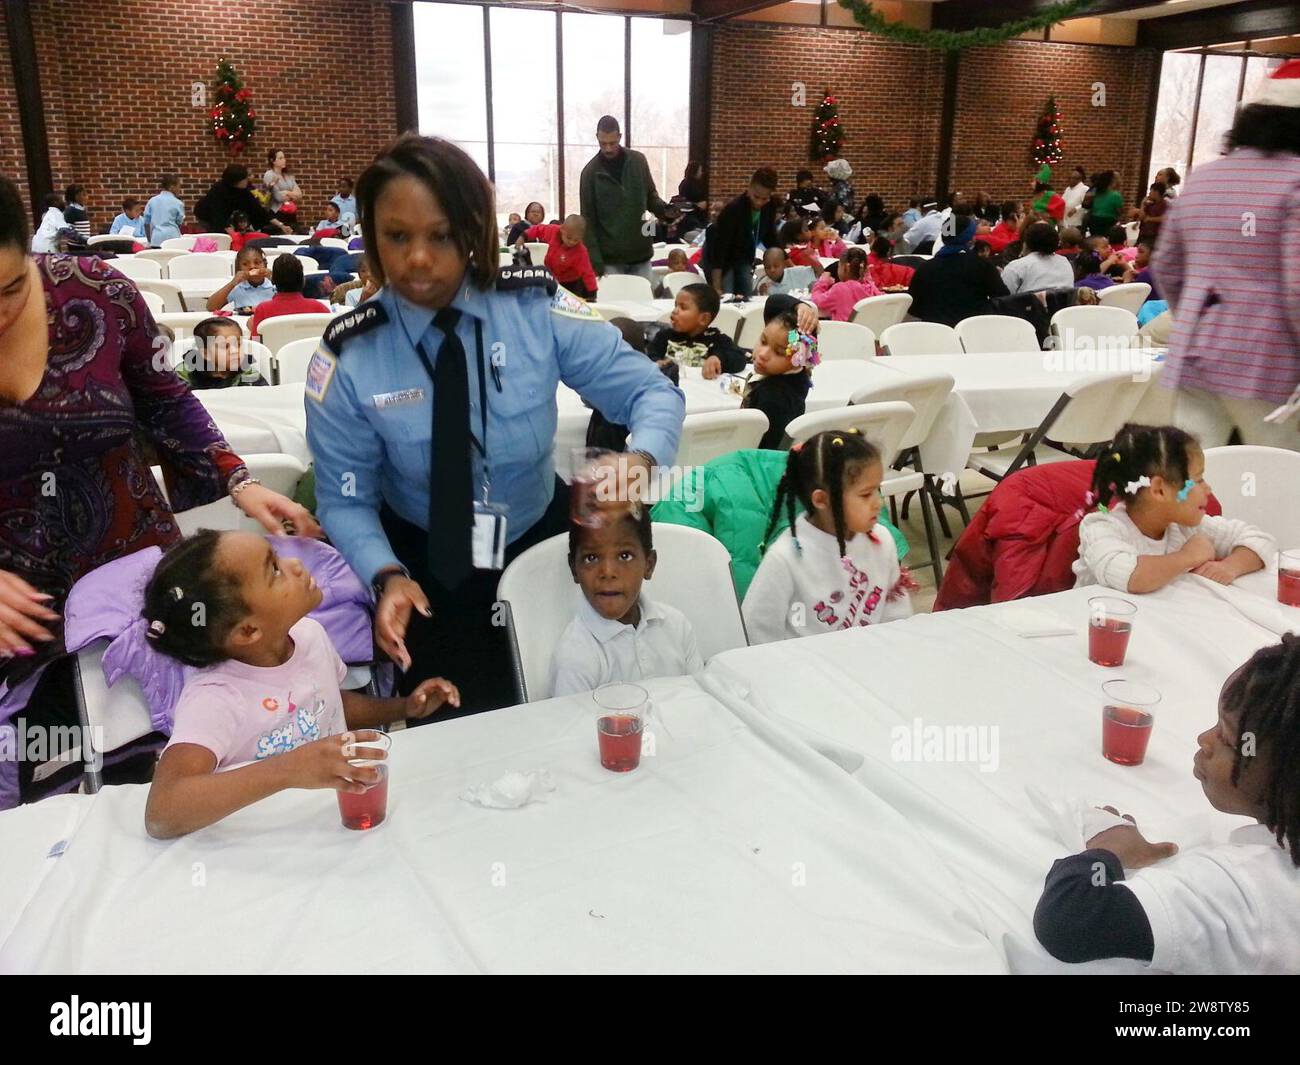 Youth At The Dc Ward 8 Metropolitan Police Department Mpd Seventh District Holiday Party For